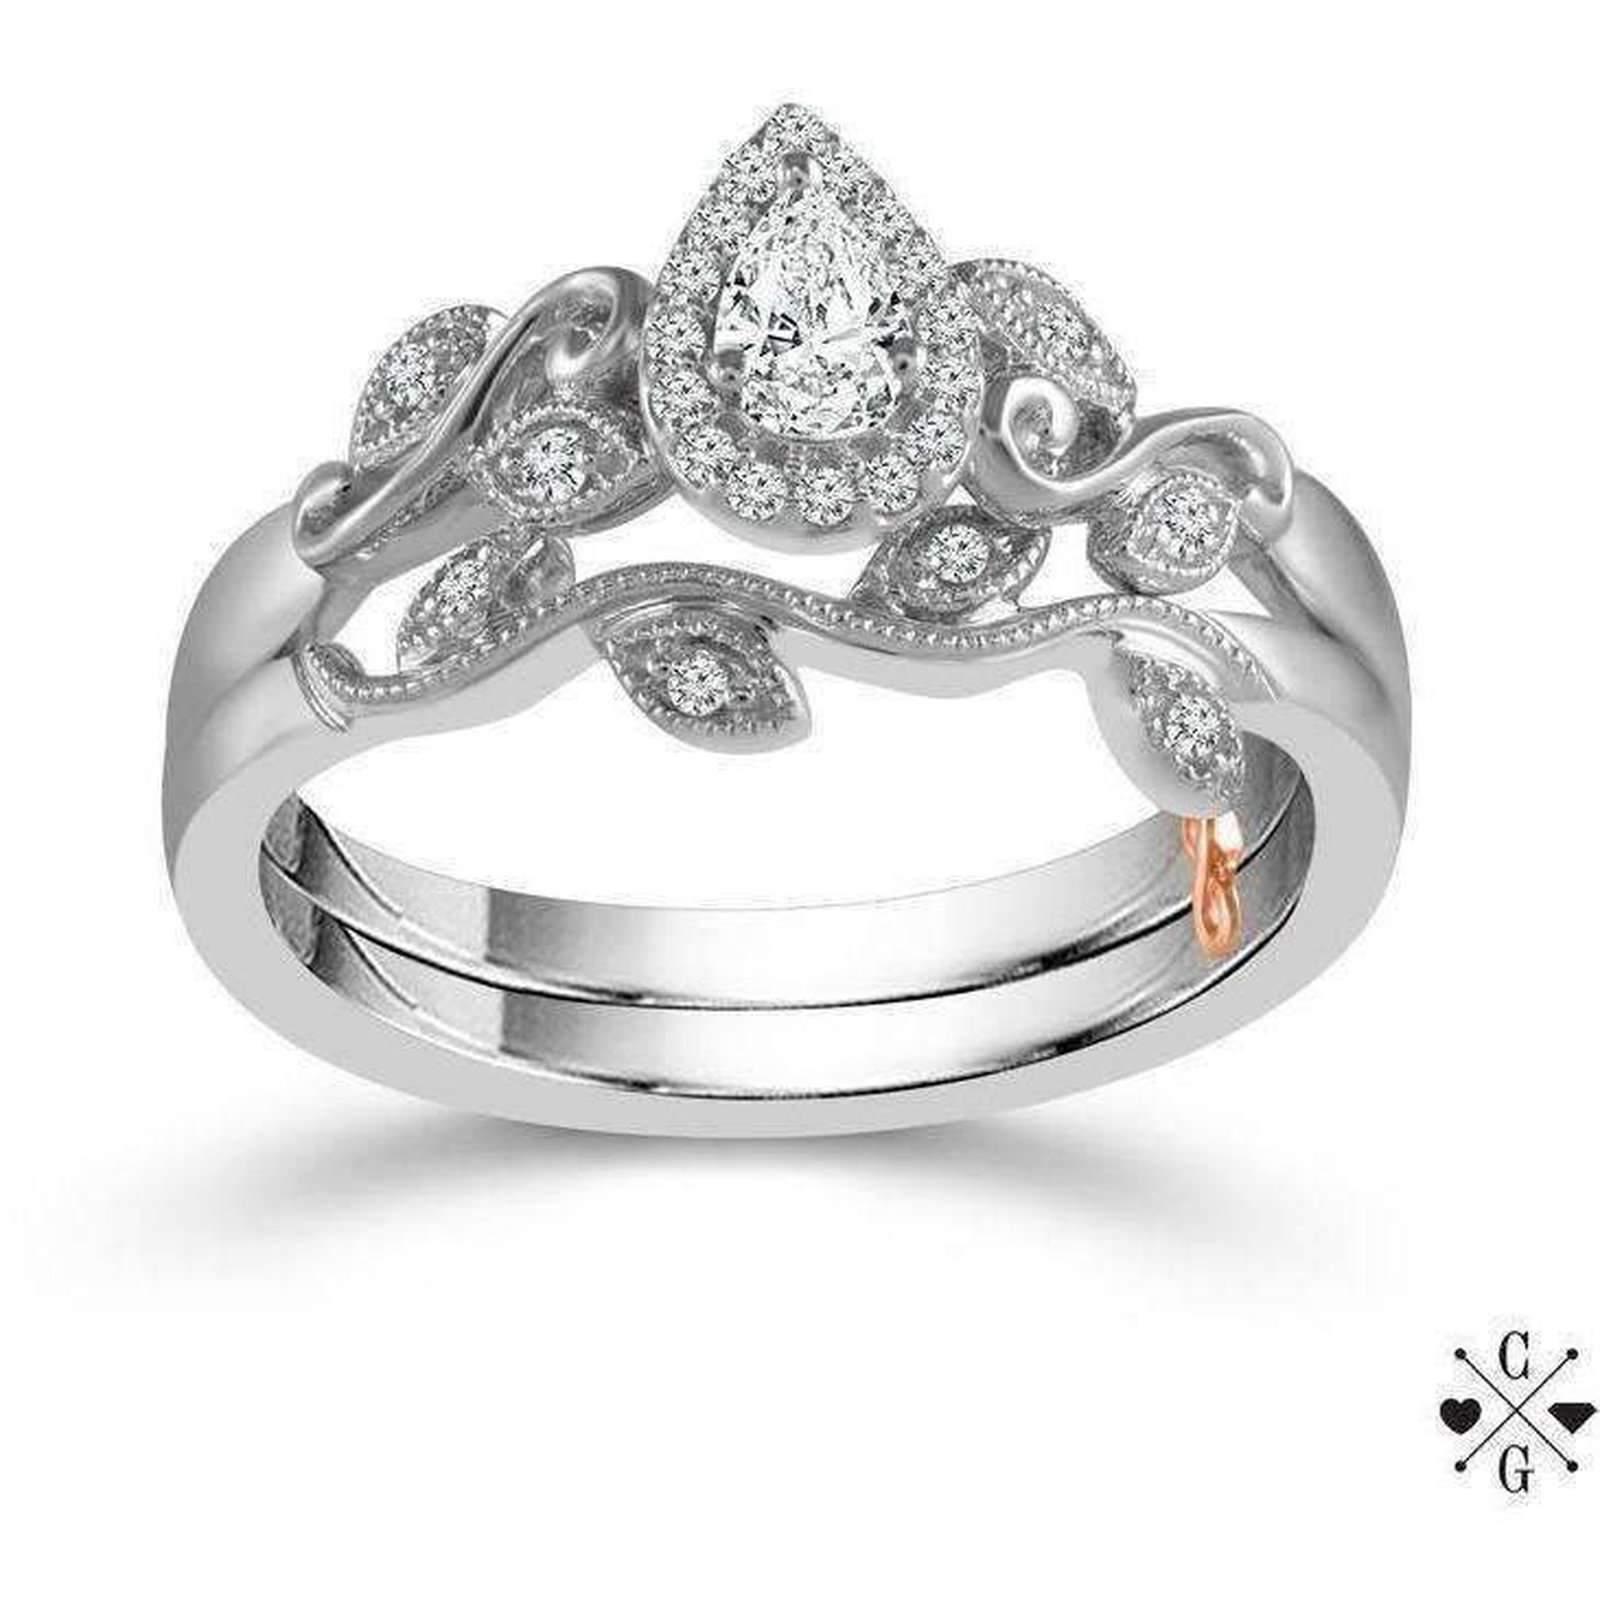 Beautiful Bride Engagement Ring Beautiful Bride Collection Pear Vintage Diamond Ring Set